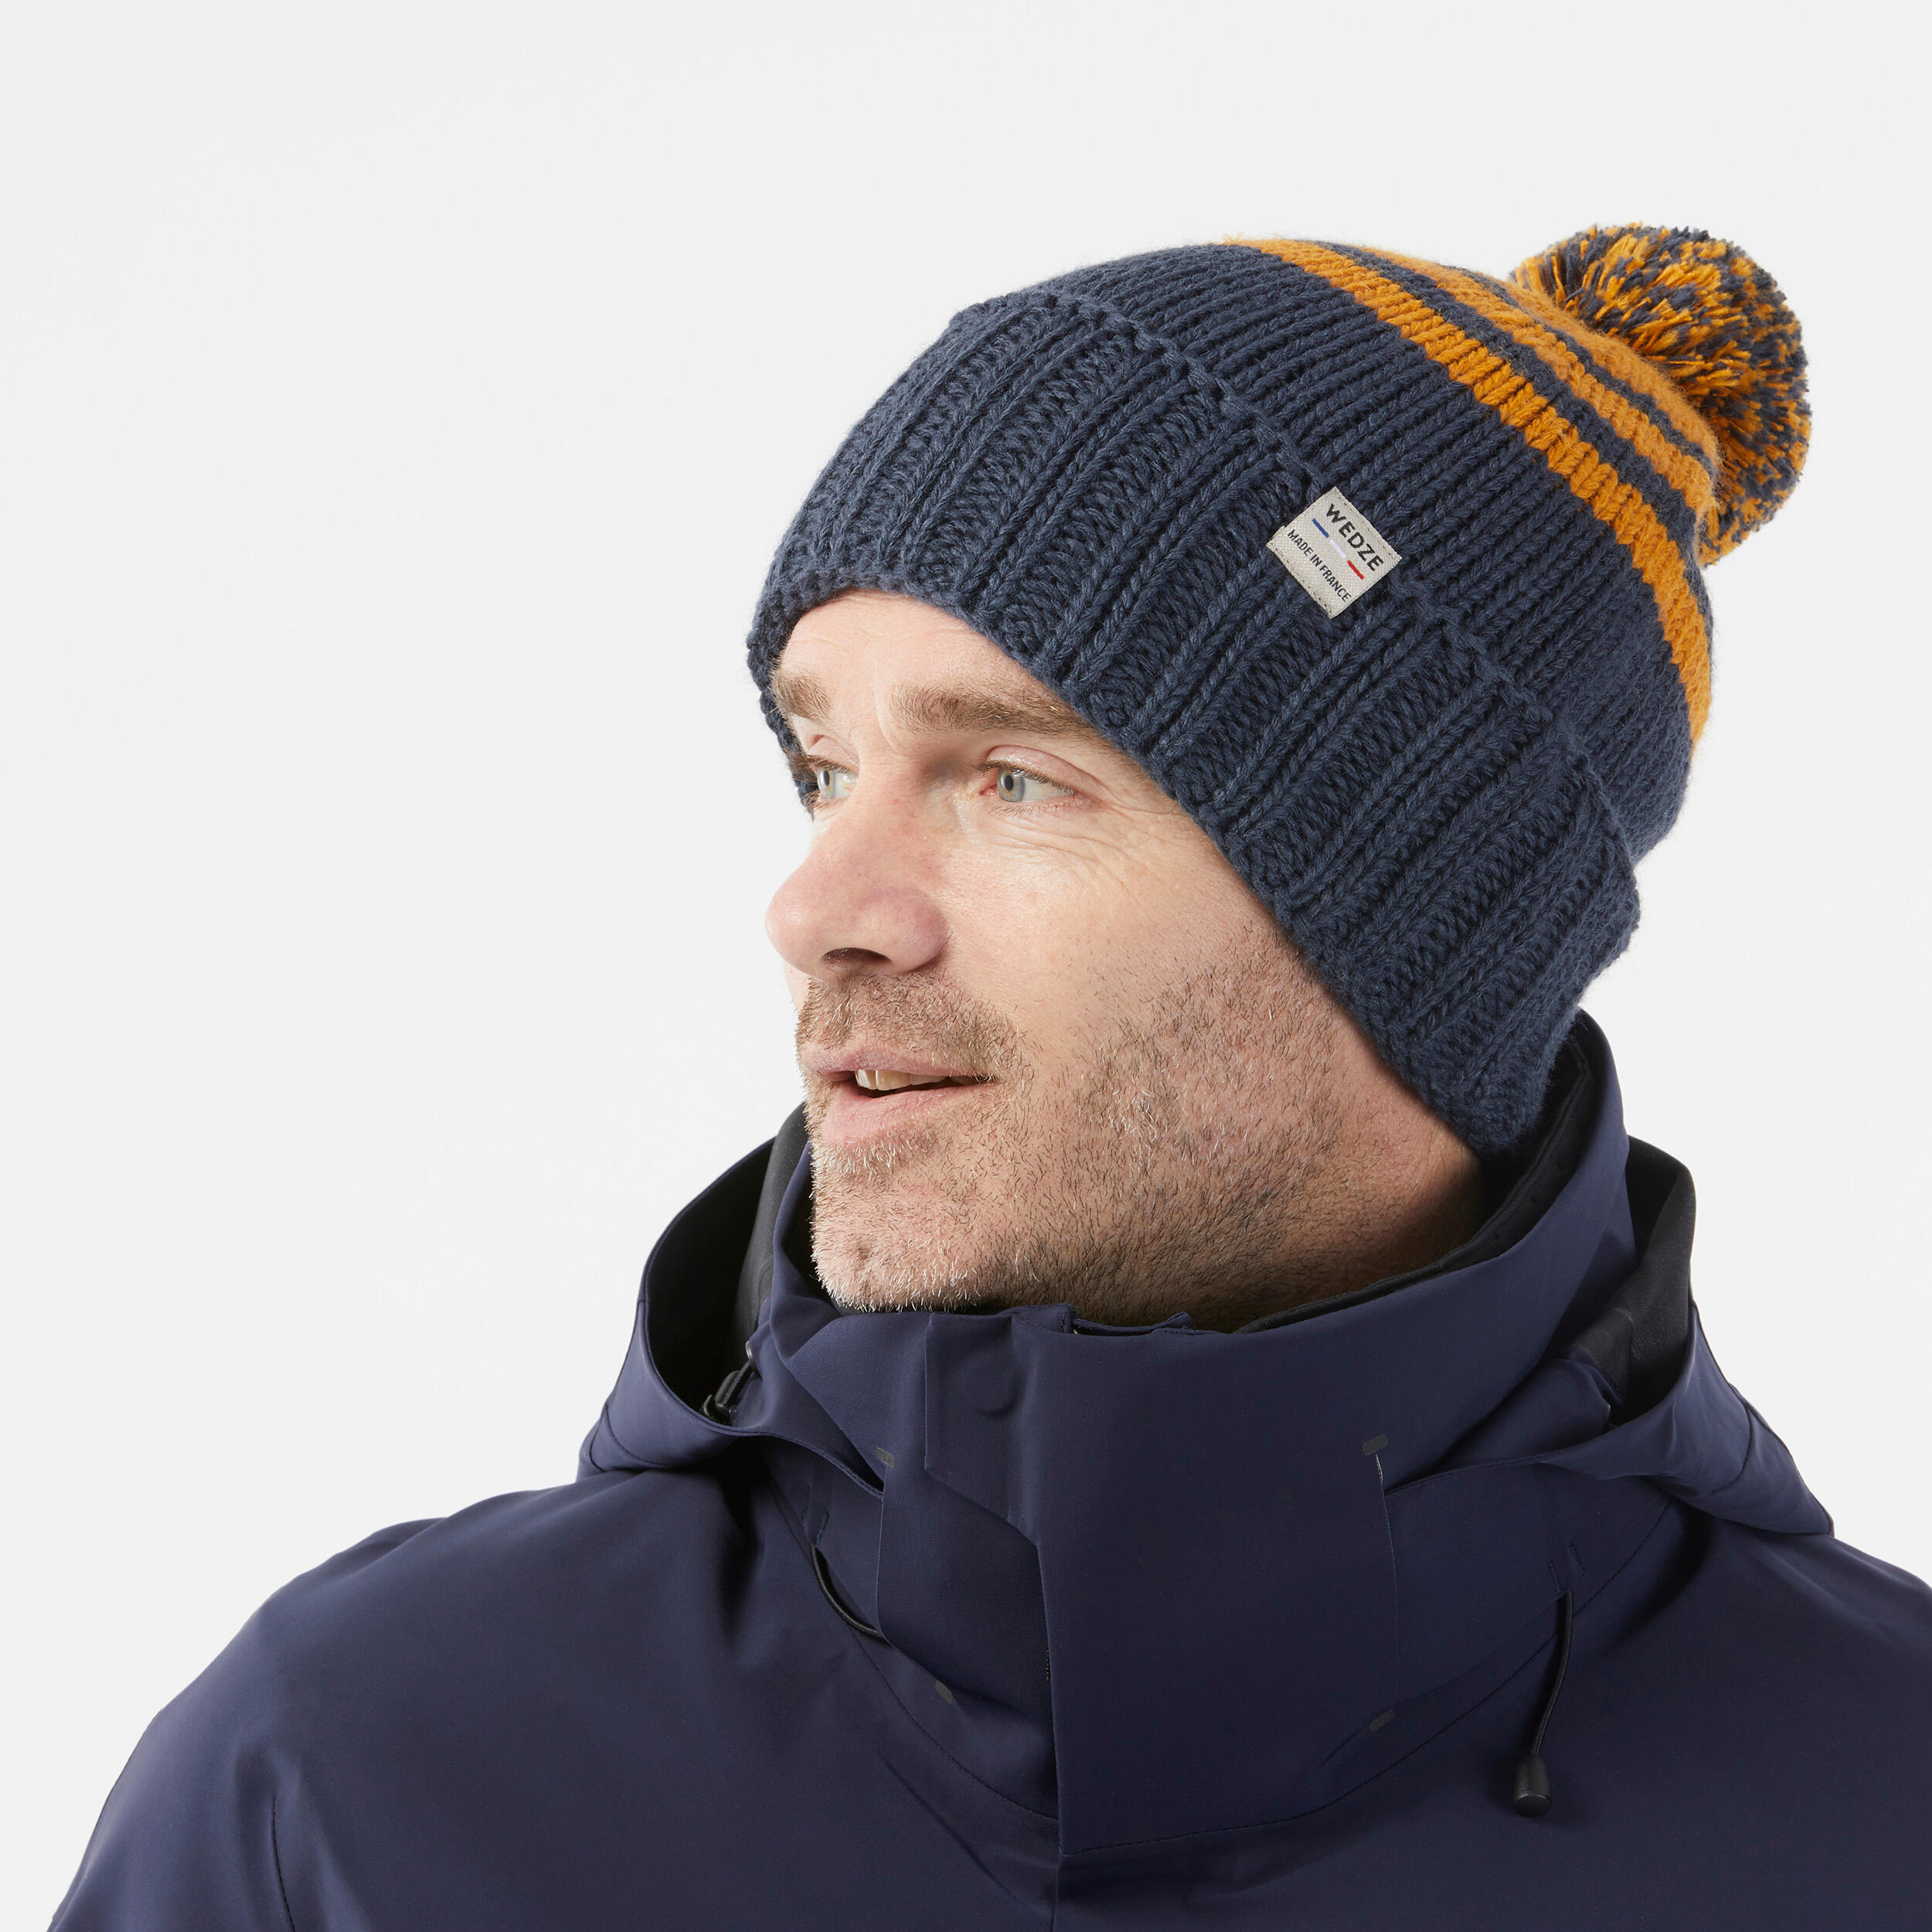 ADULT SKI HAT GRAND NORD MADE IN FRANCE - NAVY BLUE-OCHRE 2/8